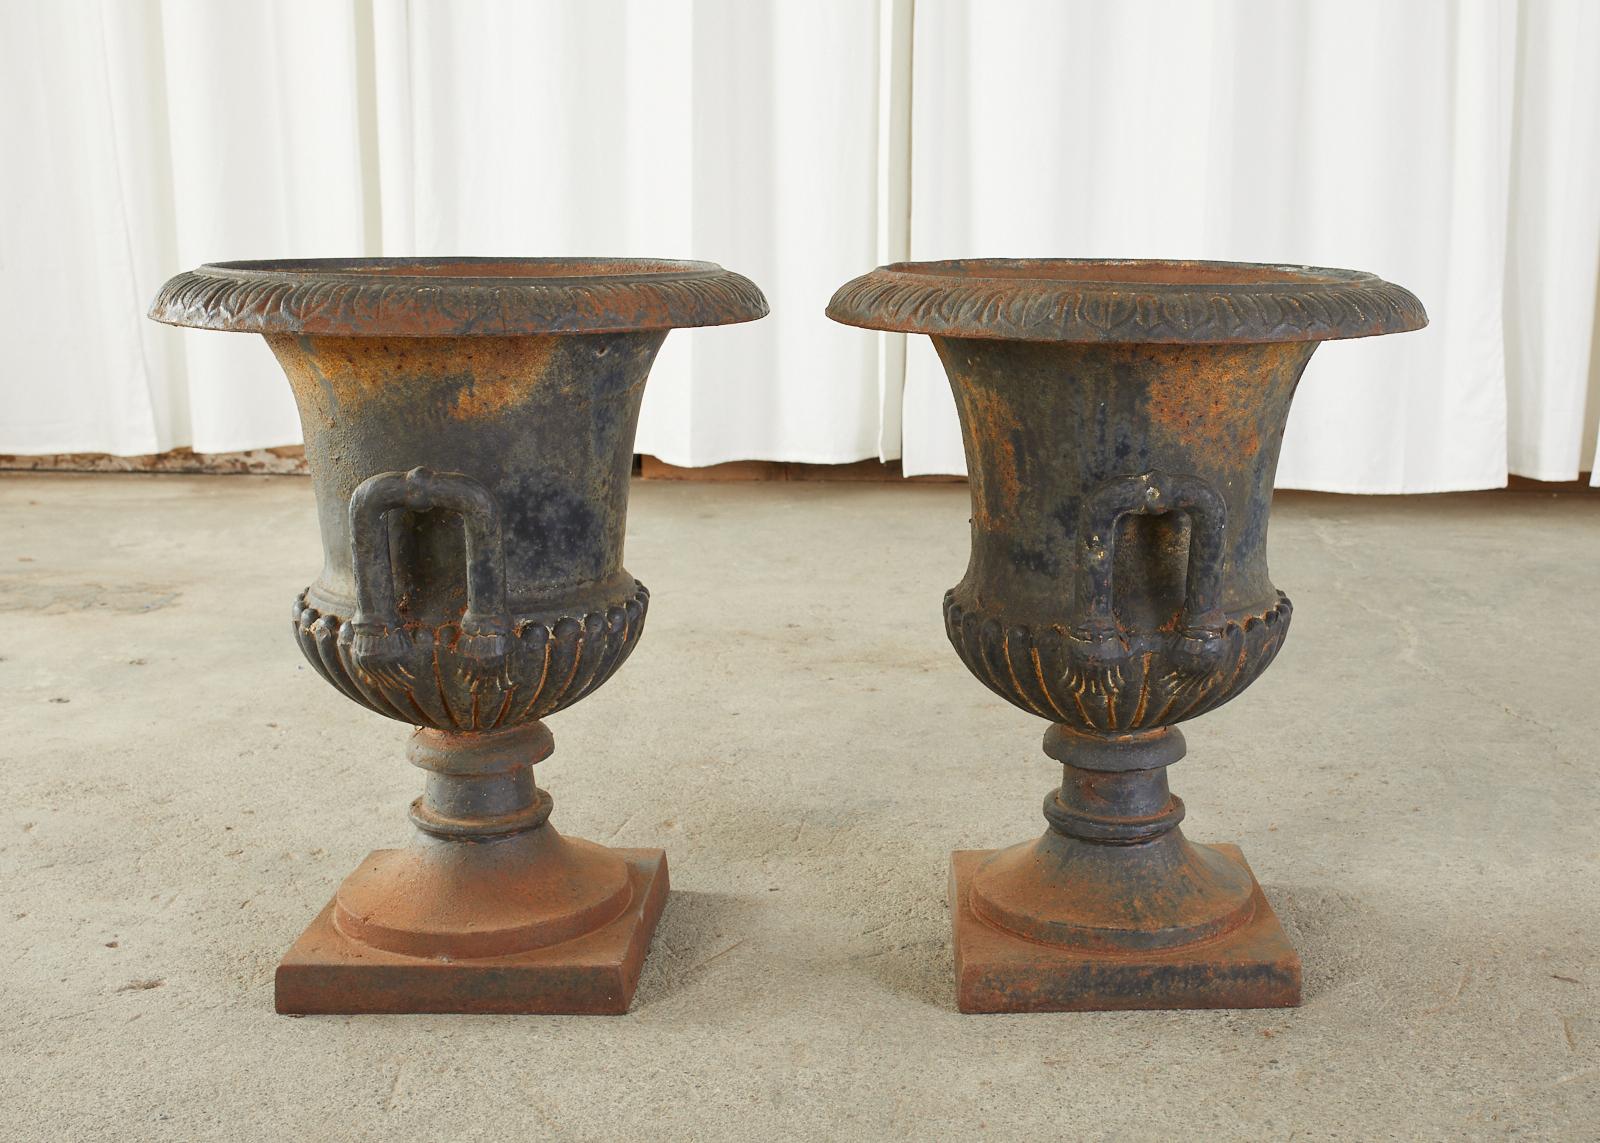 20th Century Pair of English Neoclassical Style Cast Iron Garden Urns